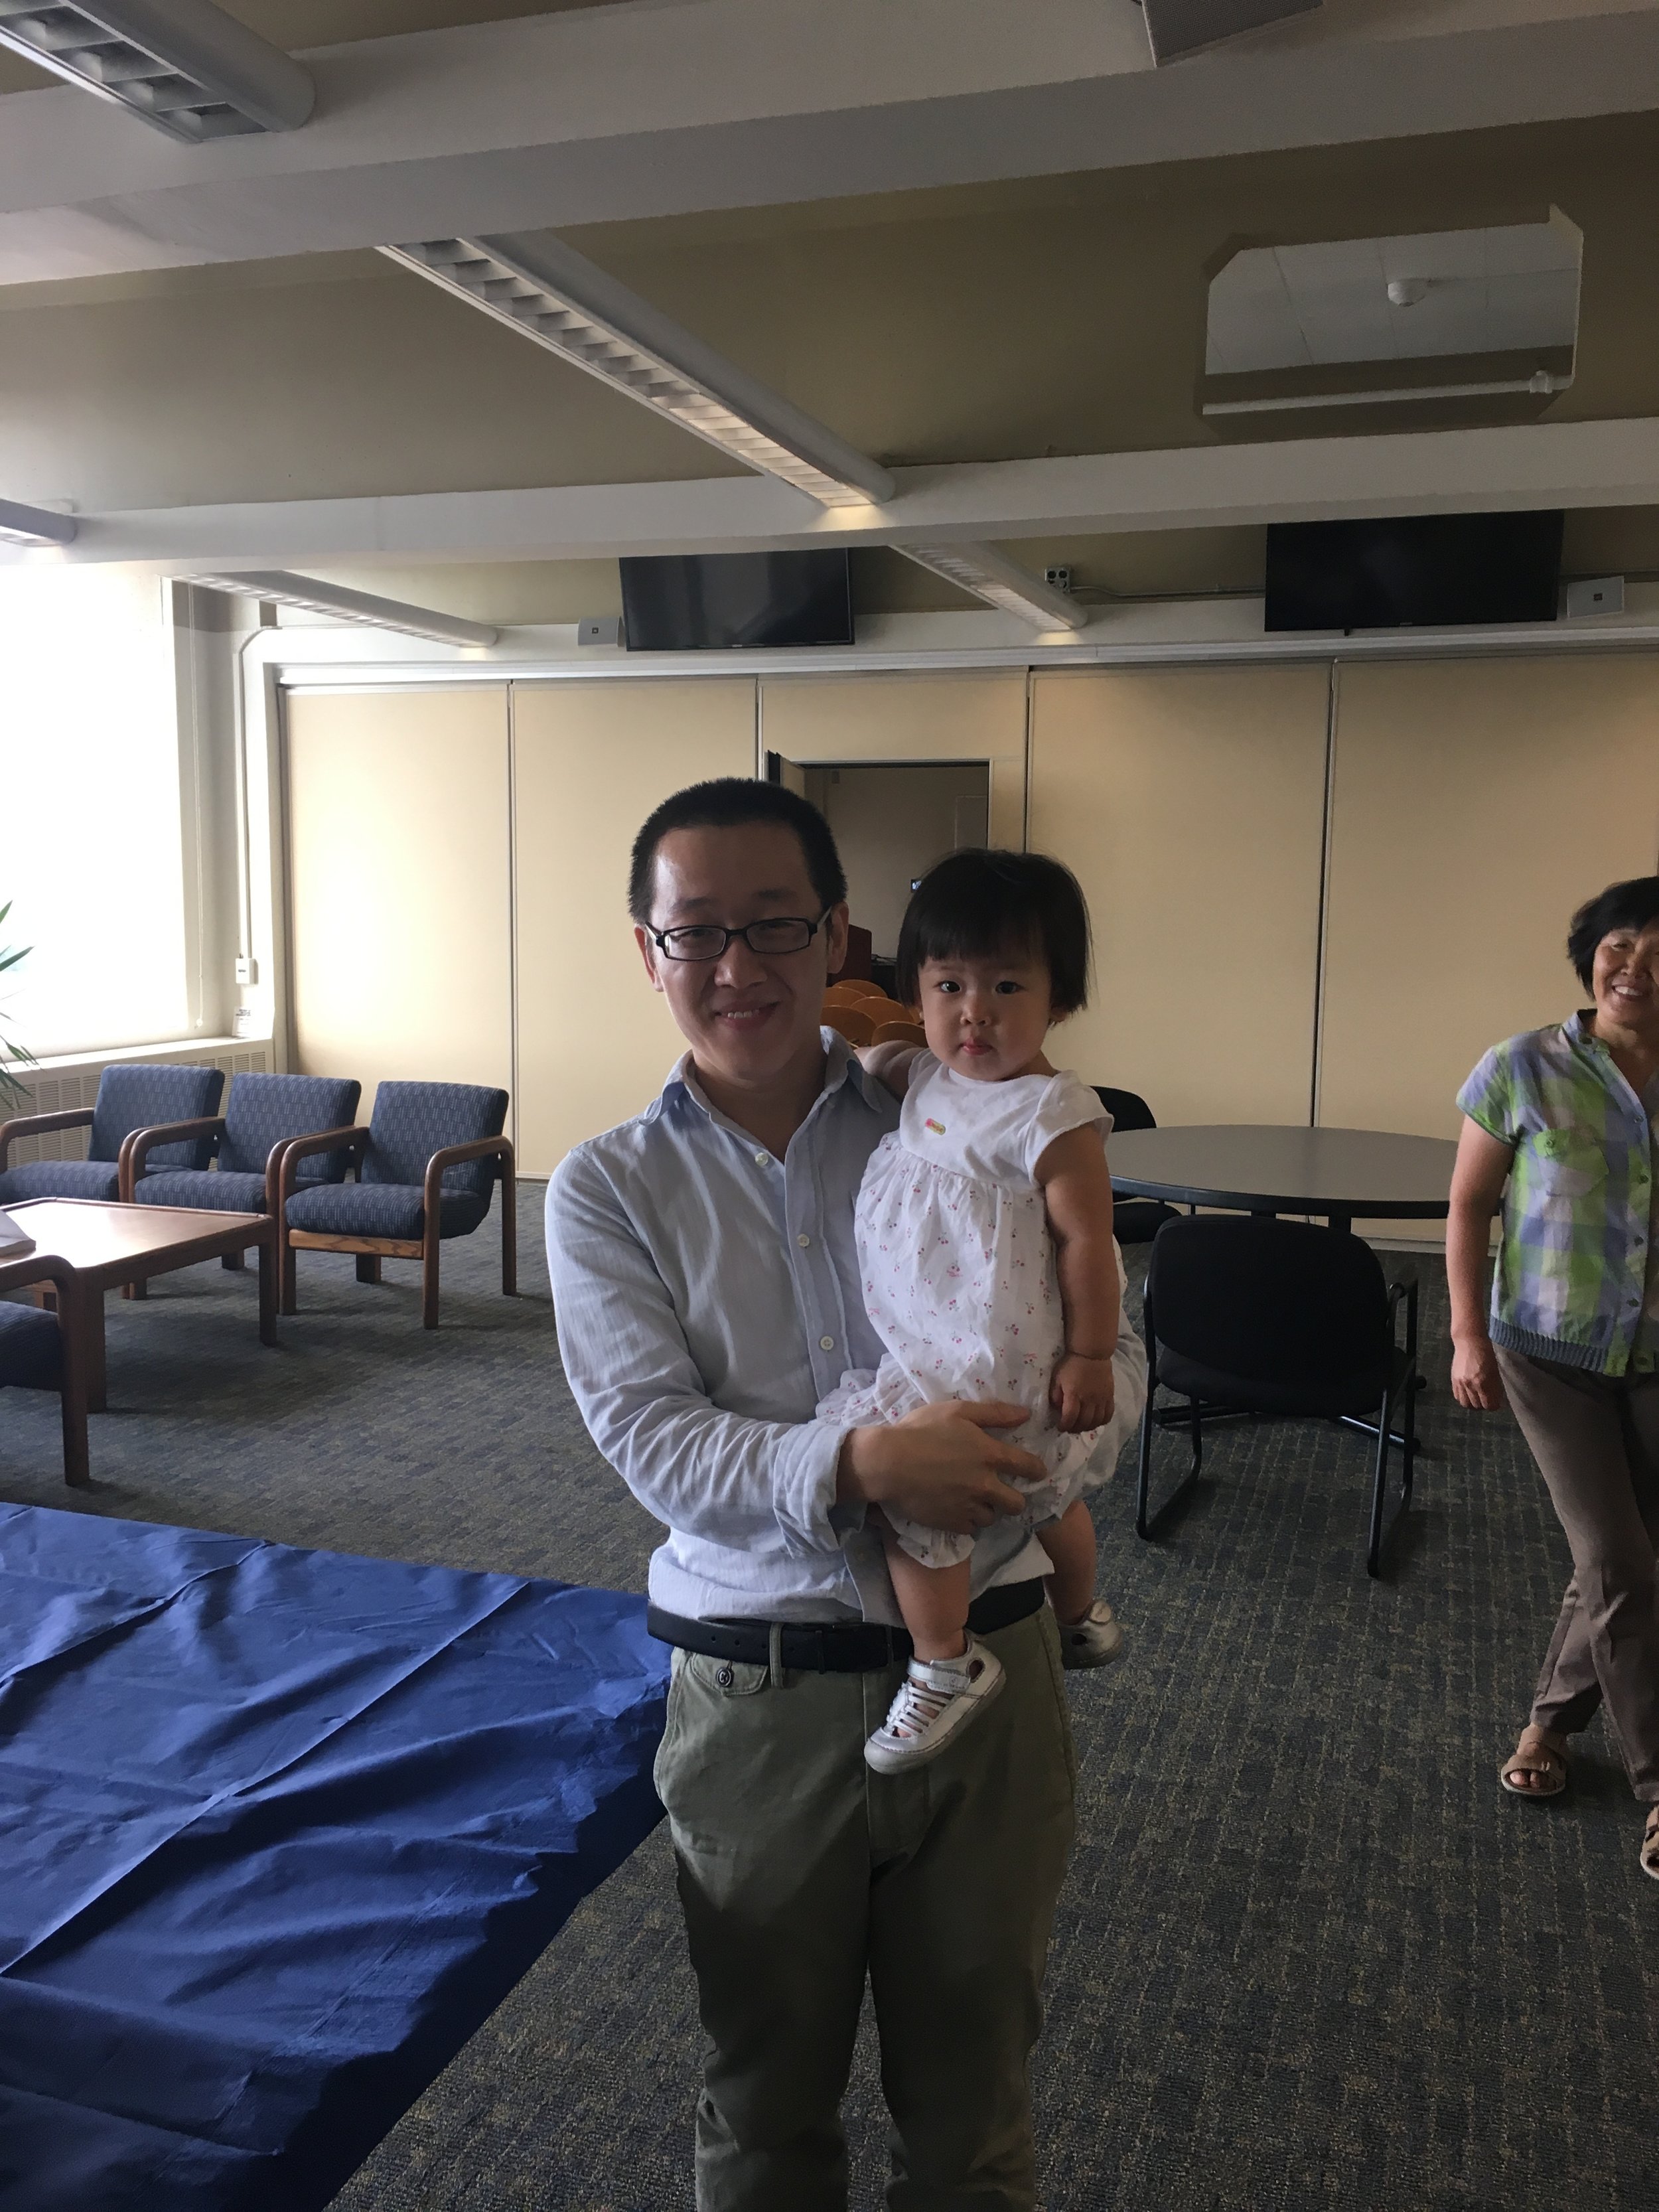 Dr. Shaojie Song and his daughter